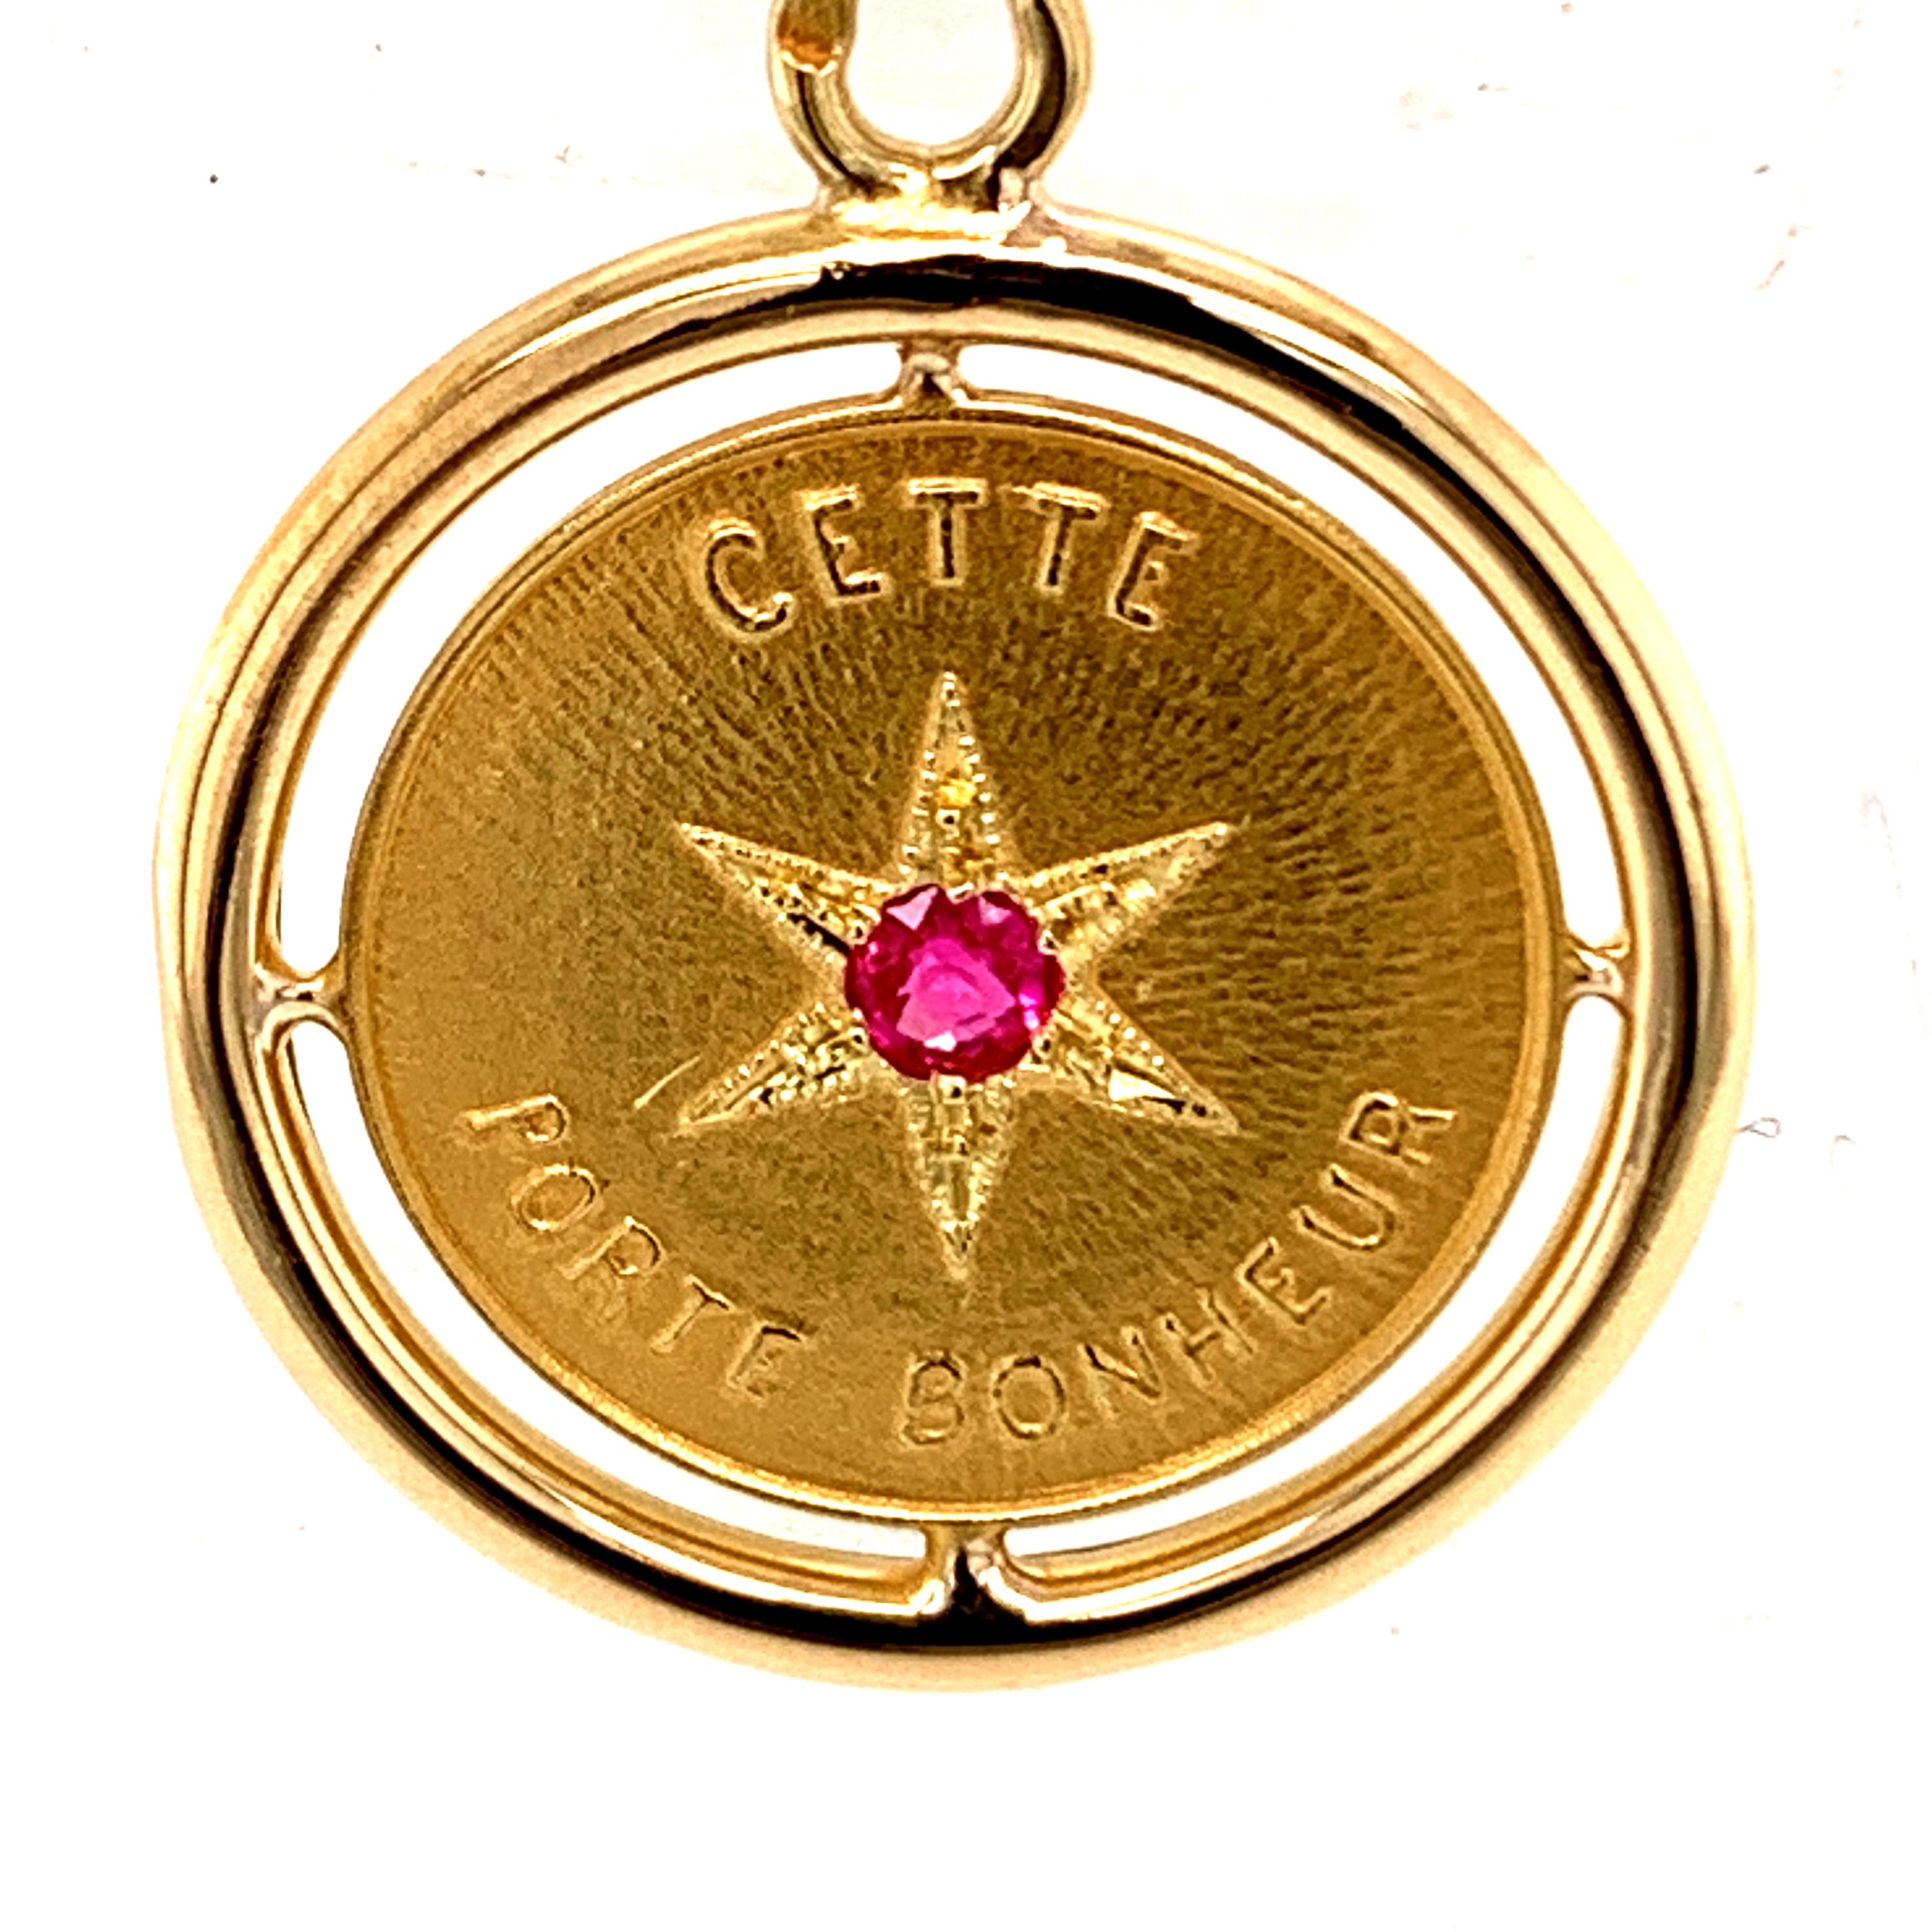 Charming French charm:  with an openwork 18K shiny gold bezel border and a satin gold center.  Applied letters spell out:  